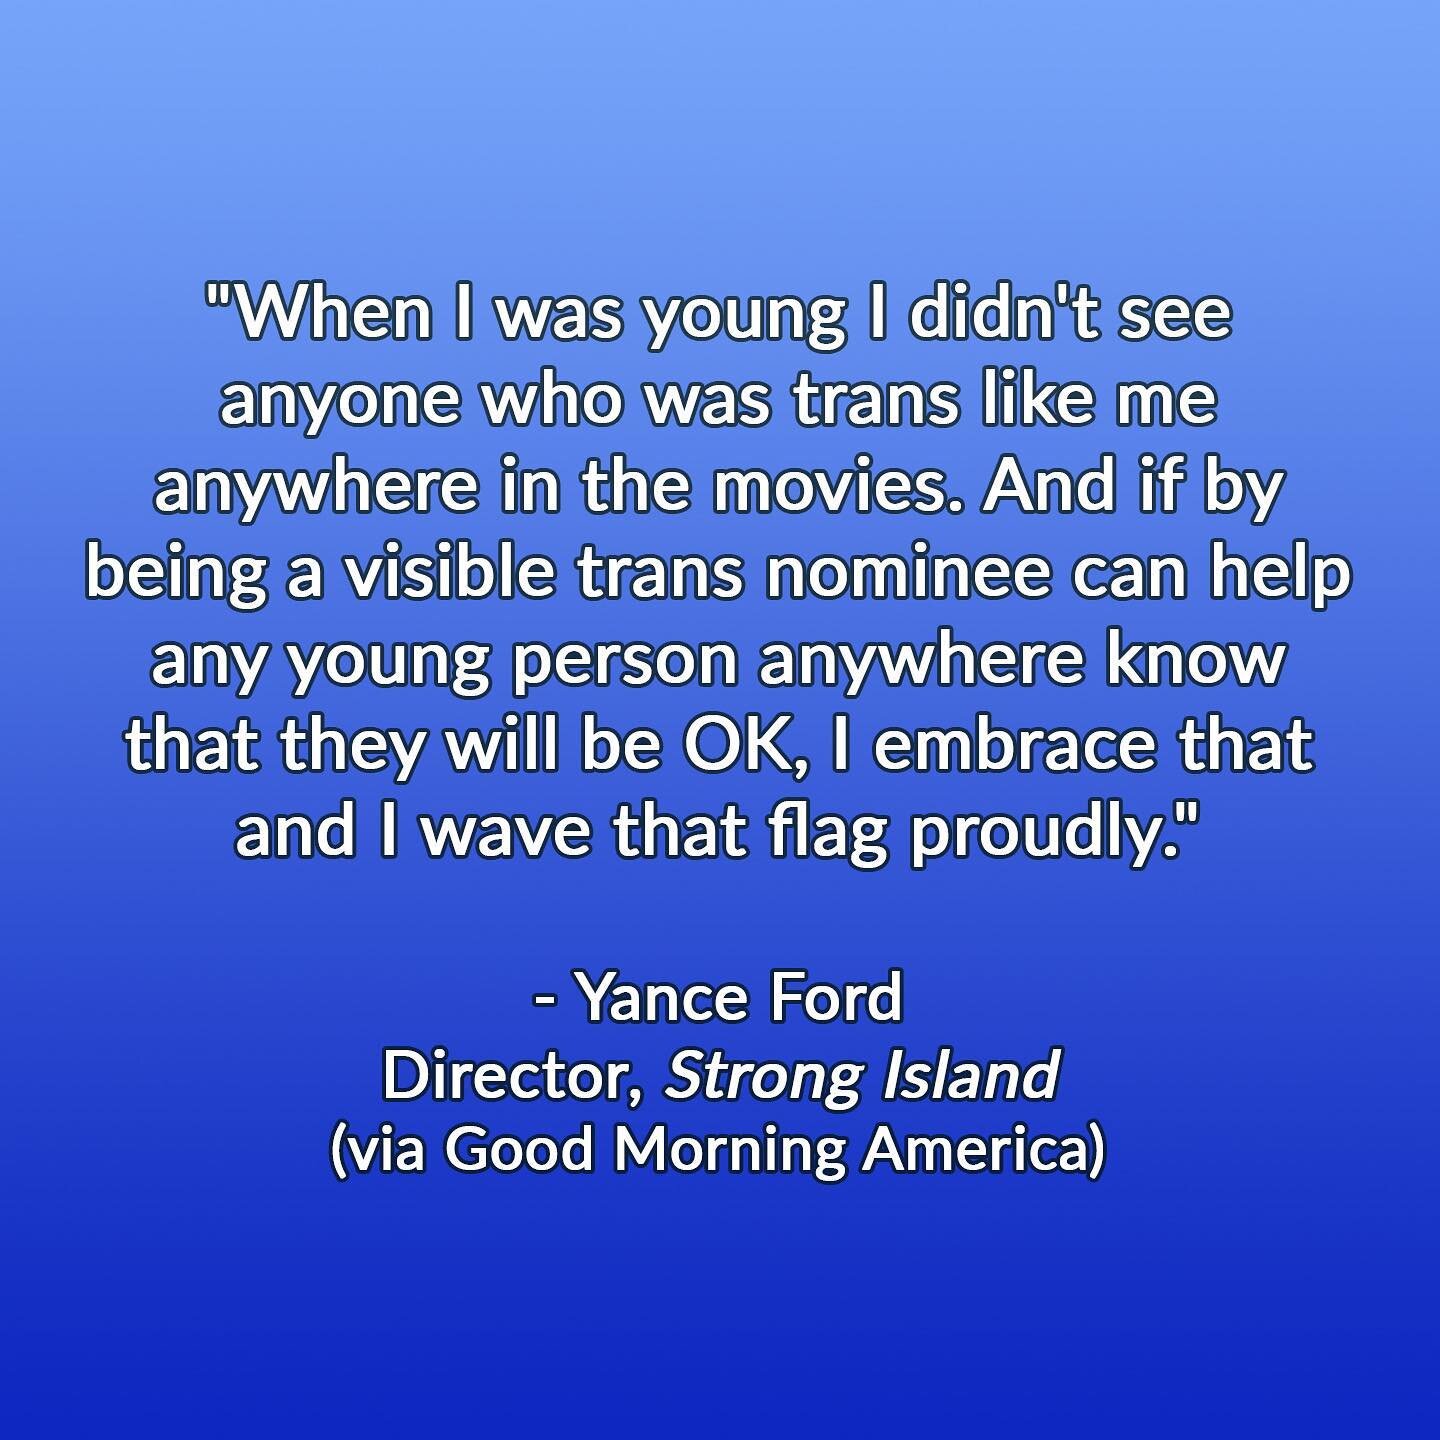 We&rsquo;re continuing to celebrate #Pride with the incredible documentarian, Yance Ford. You can watch his 2017 film, #StrongIsland, which investigates his brother&rsquo;s 1992 death on Netflix now. You can also catch him in Netflix&rsquo;s document